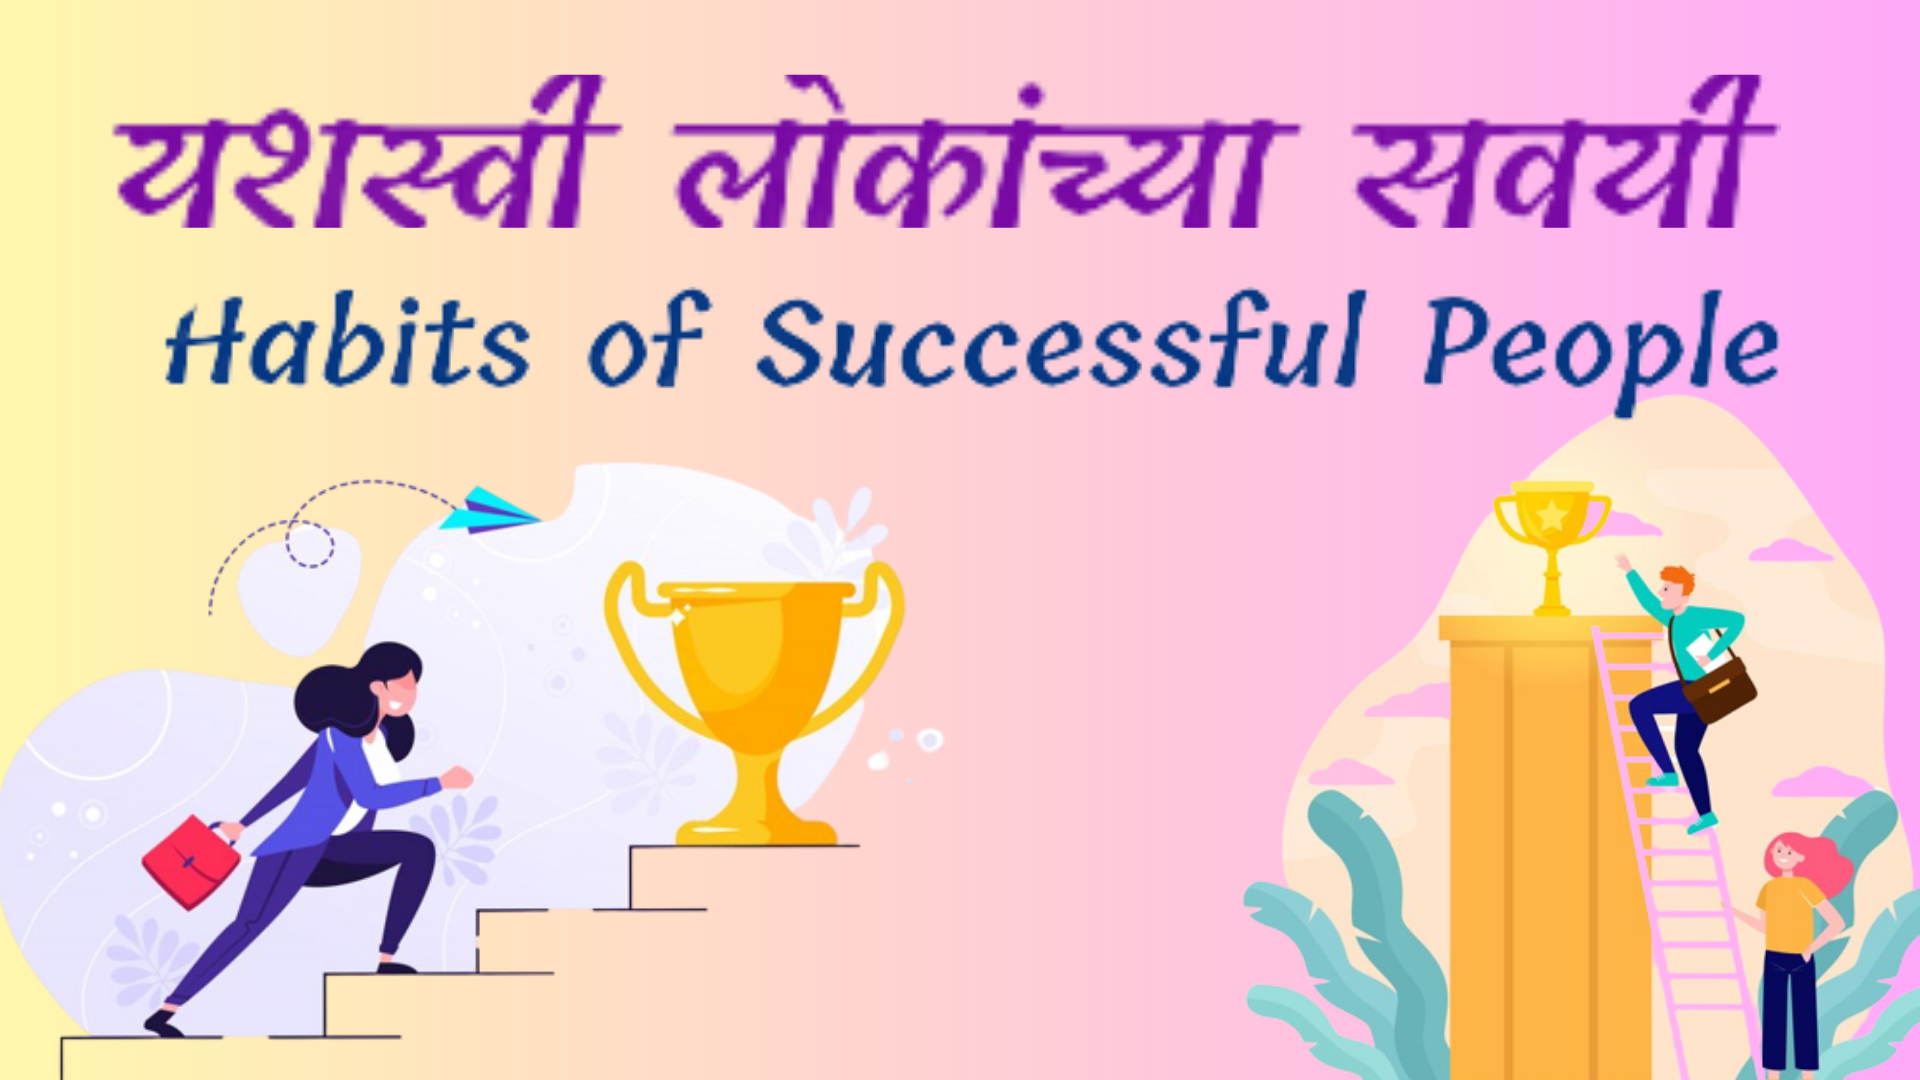 You are currently viewing यशस्वी लोकांच्या सवयी । Habits of Successful People in Marathi